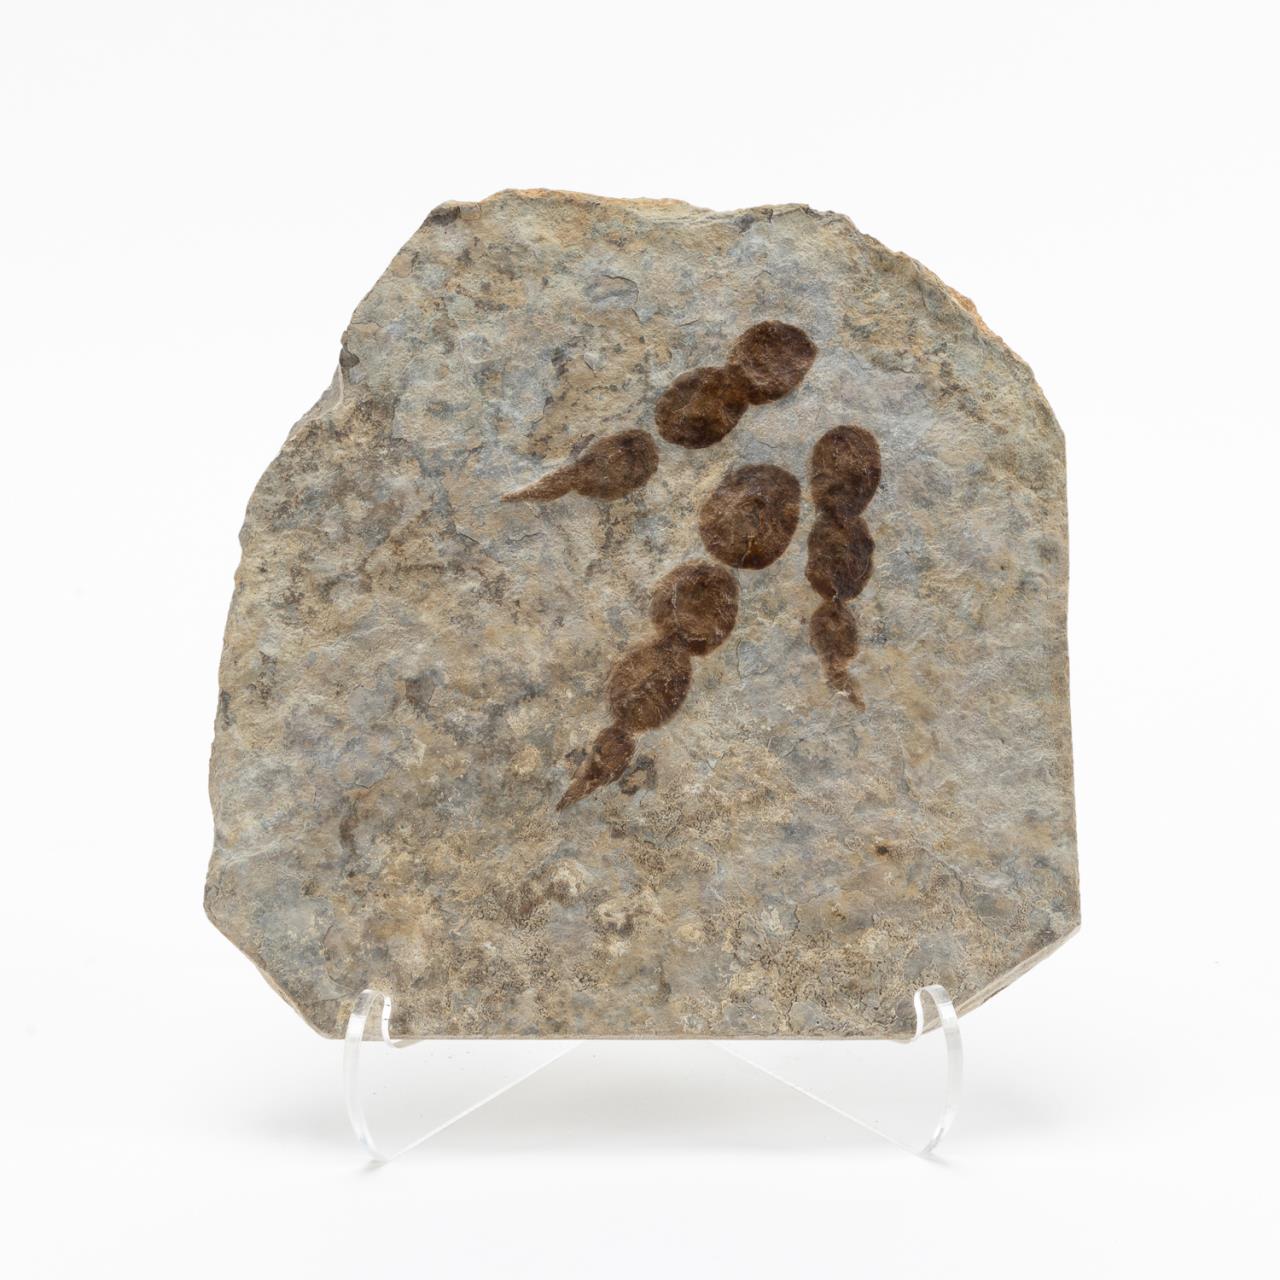 DINOSAUR TRACK FOSSIL ON STAND  35a2d2